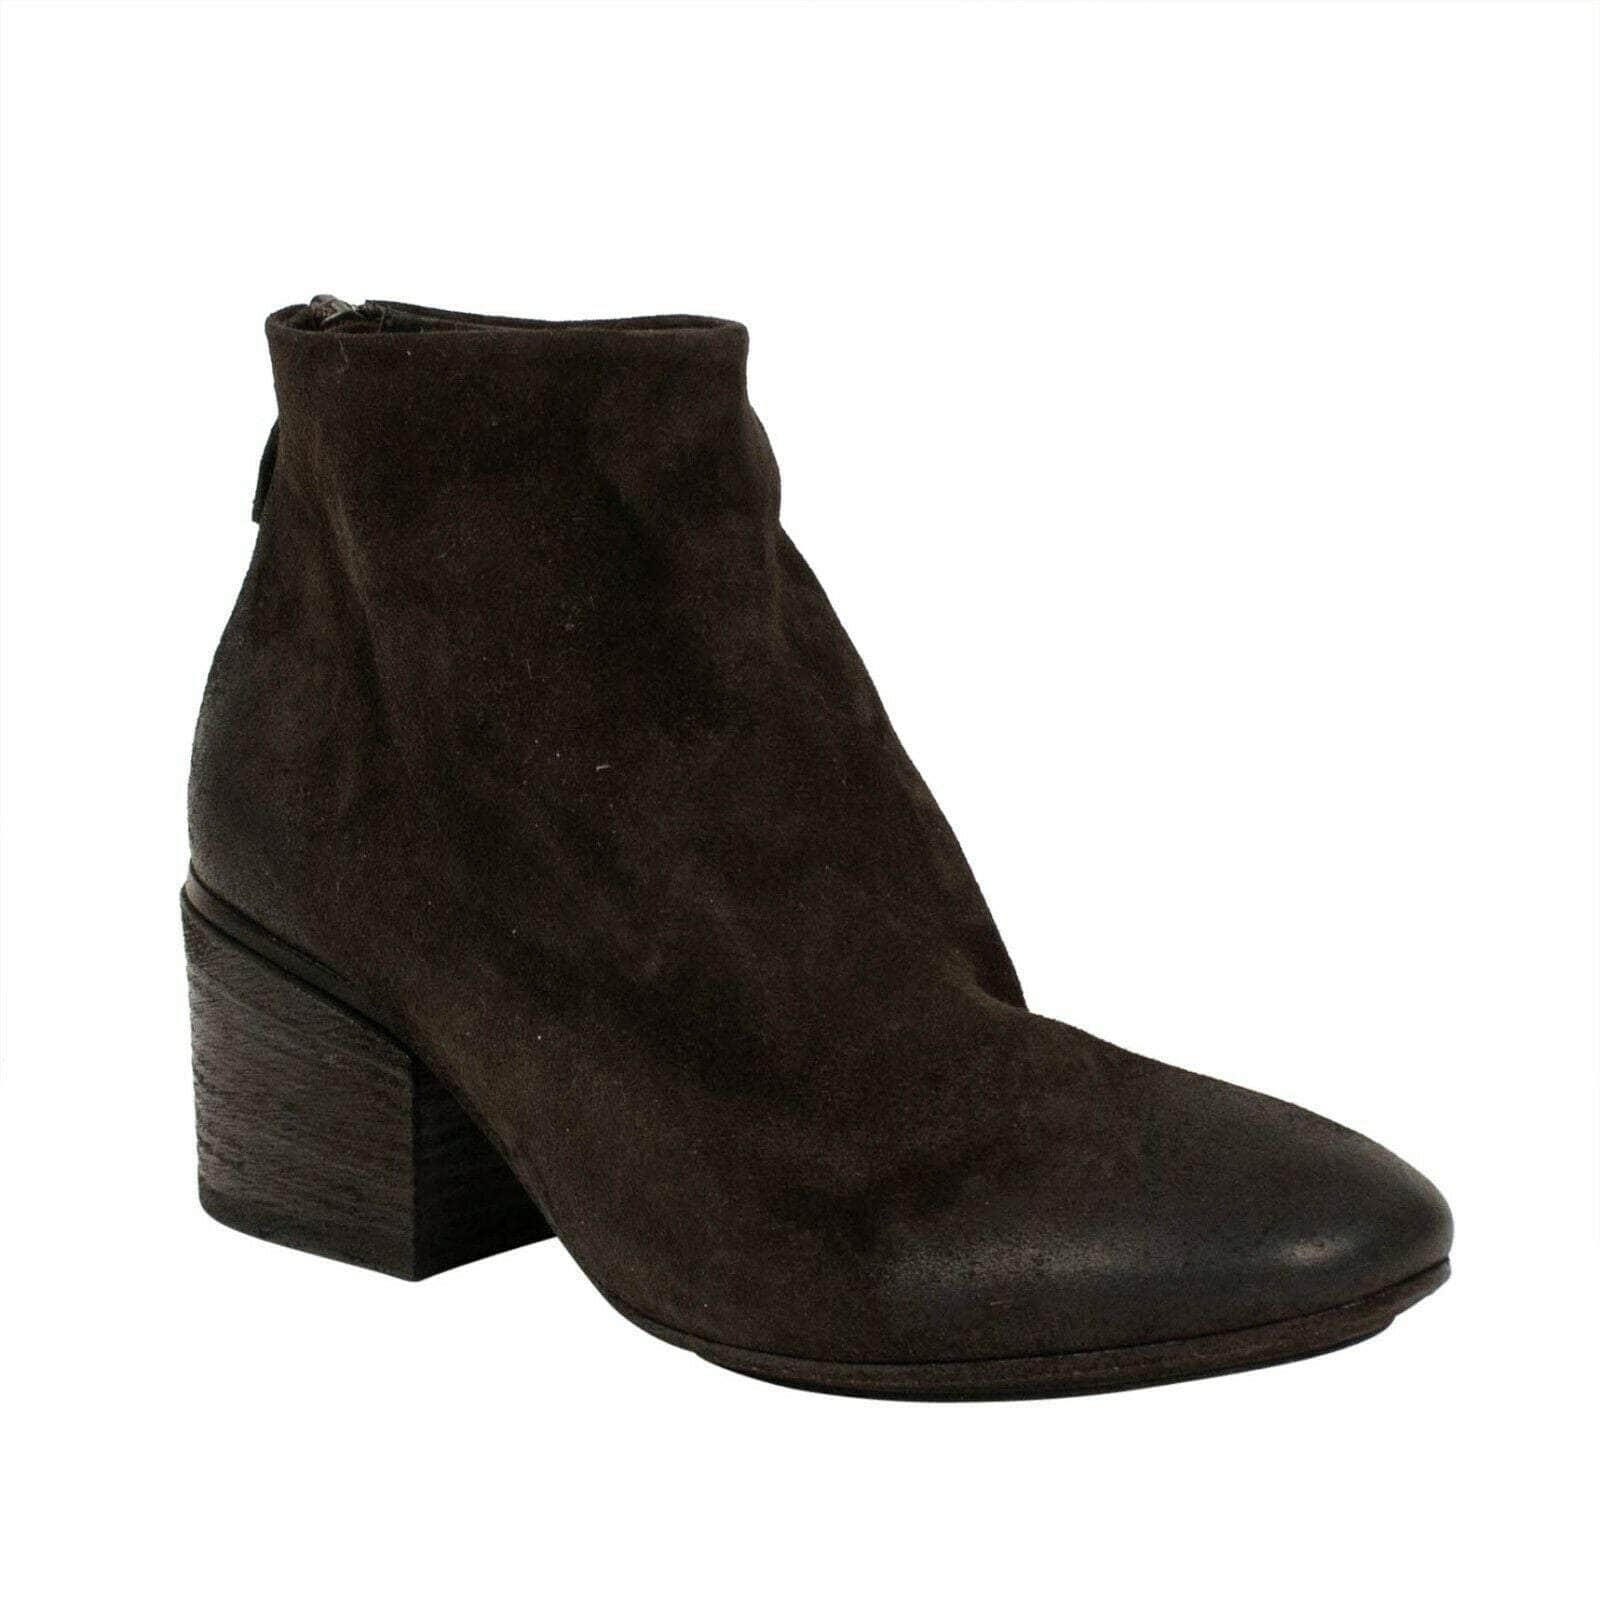 Marsell Boots 40 EU Funghetto Distressed Leather Ankle Boots - Brown 69LE-2105/10 69LE-2105/10